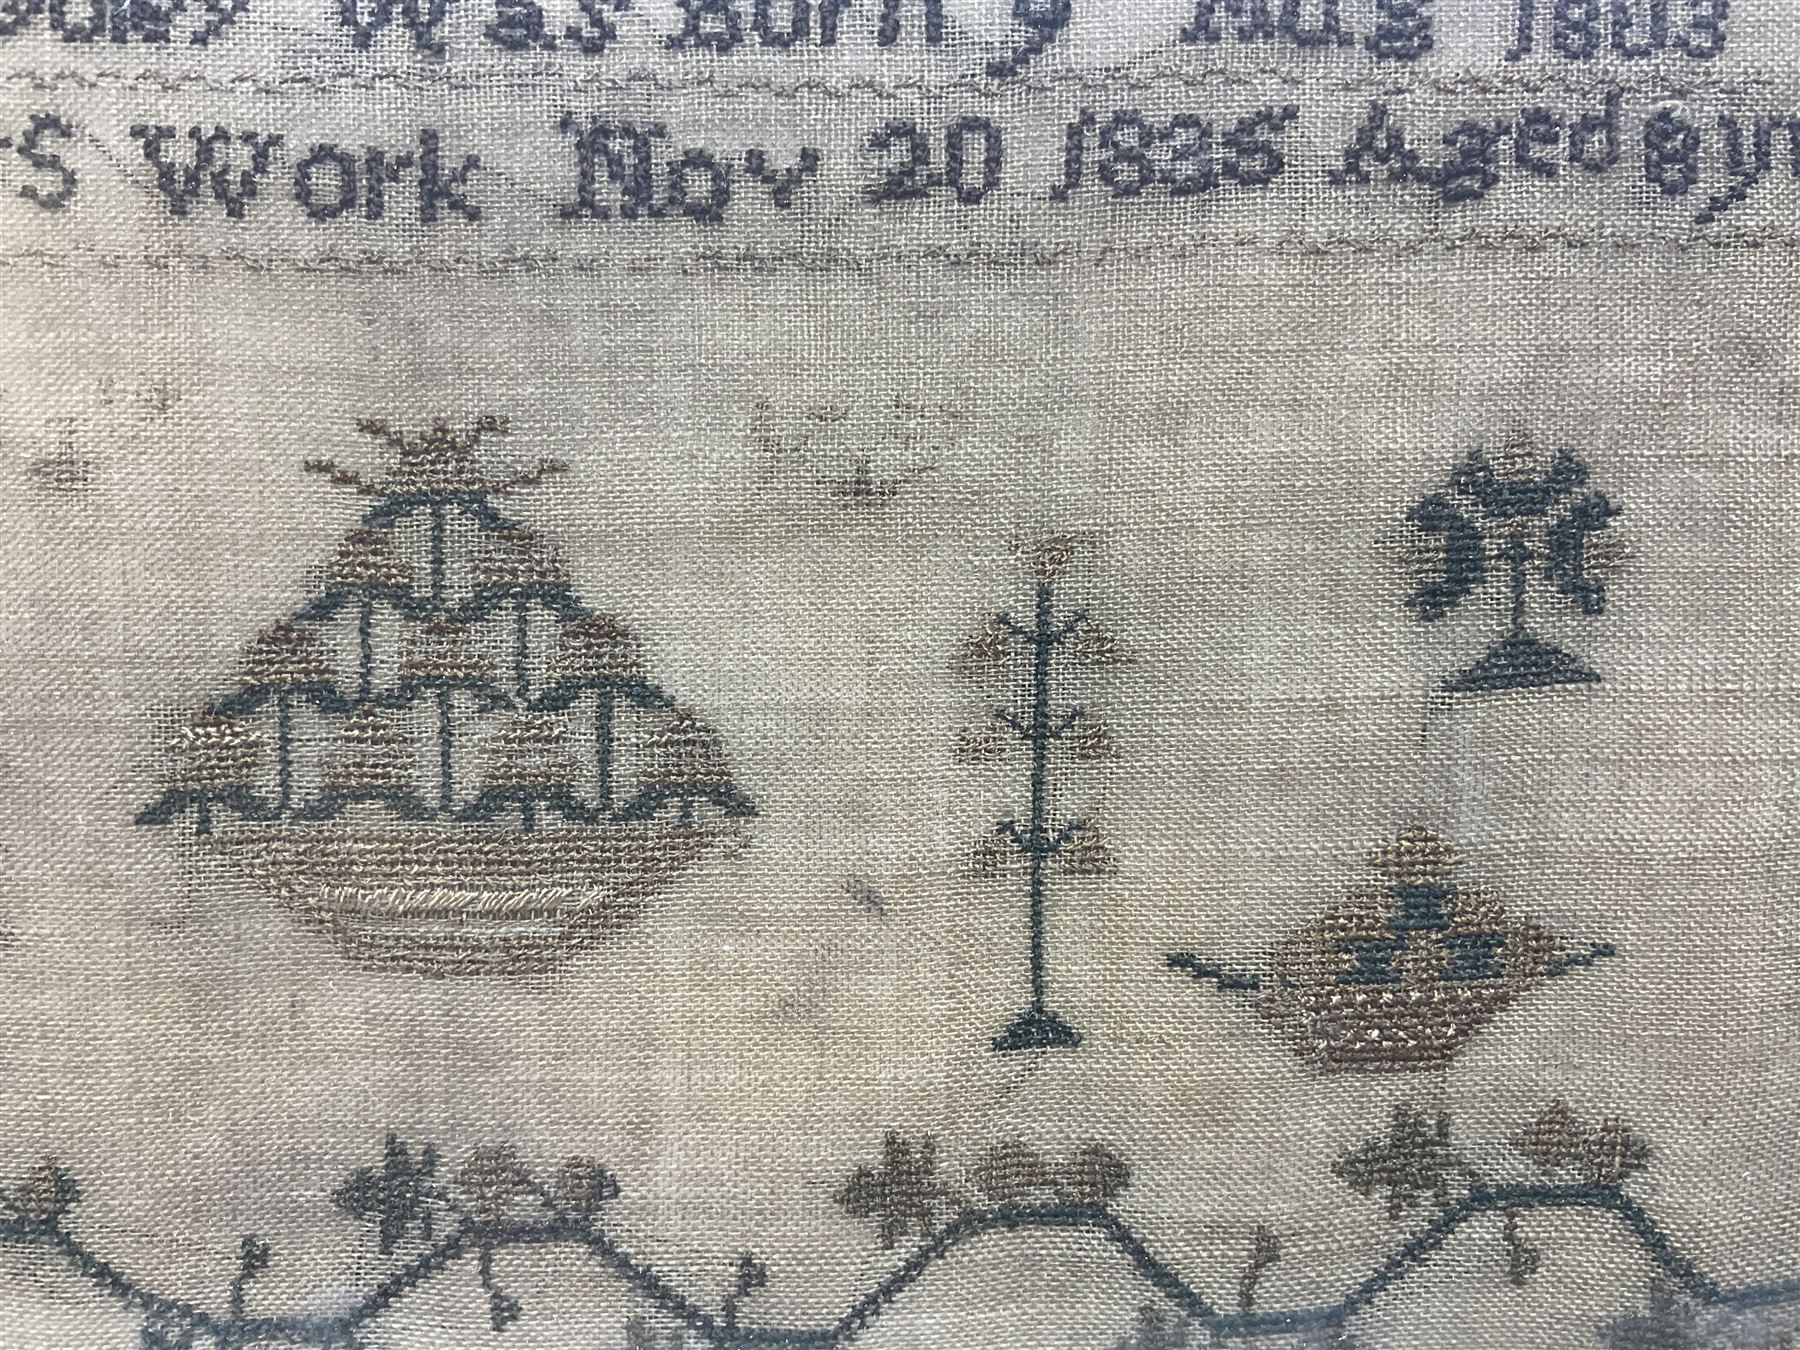 William IV needlework sampler by Ann Coley aged 8 years - Image 6 of 11